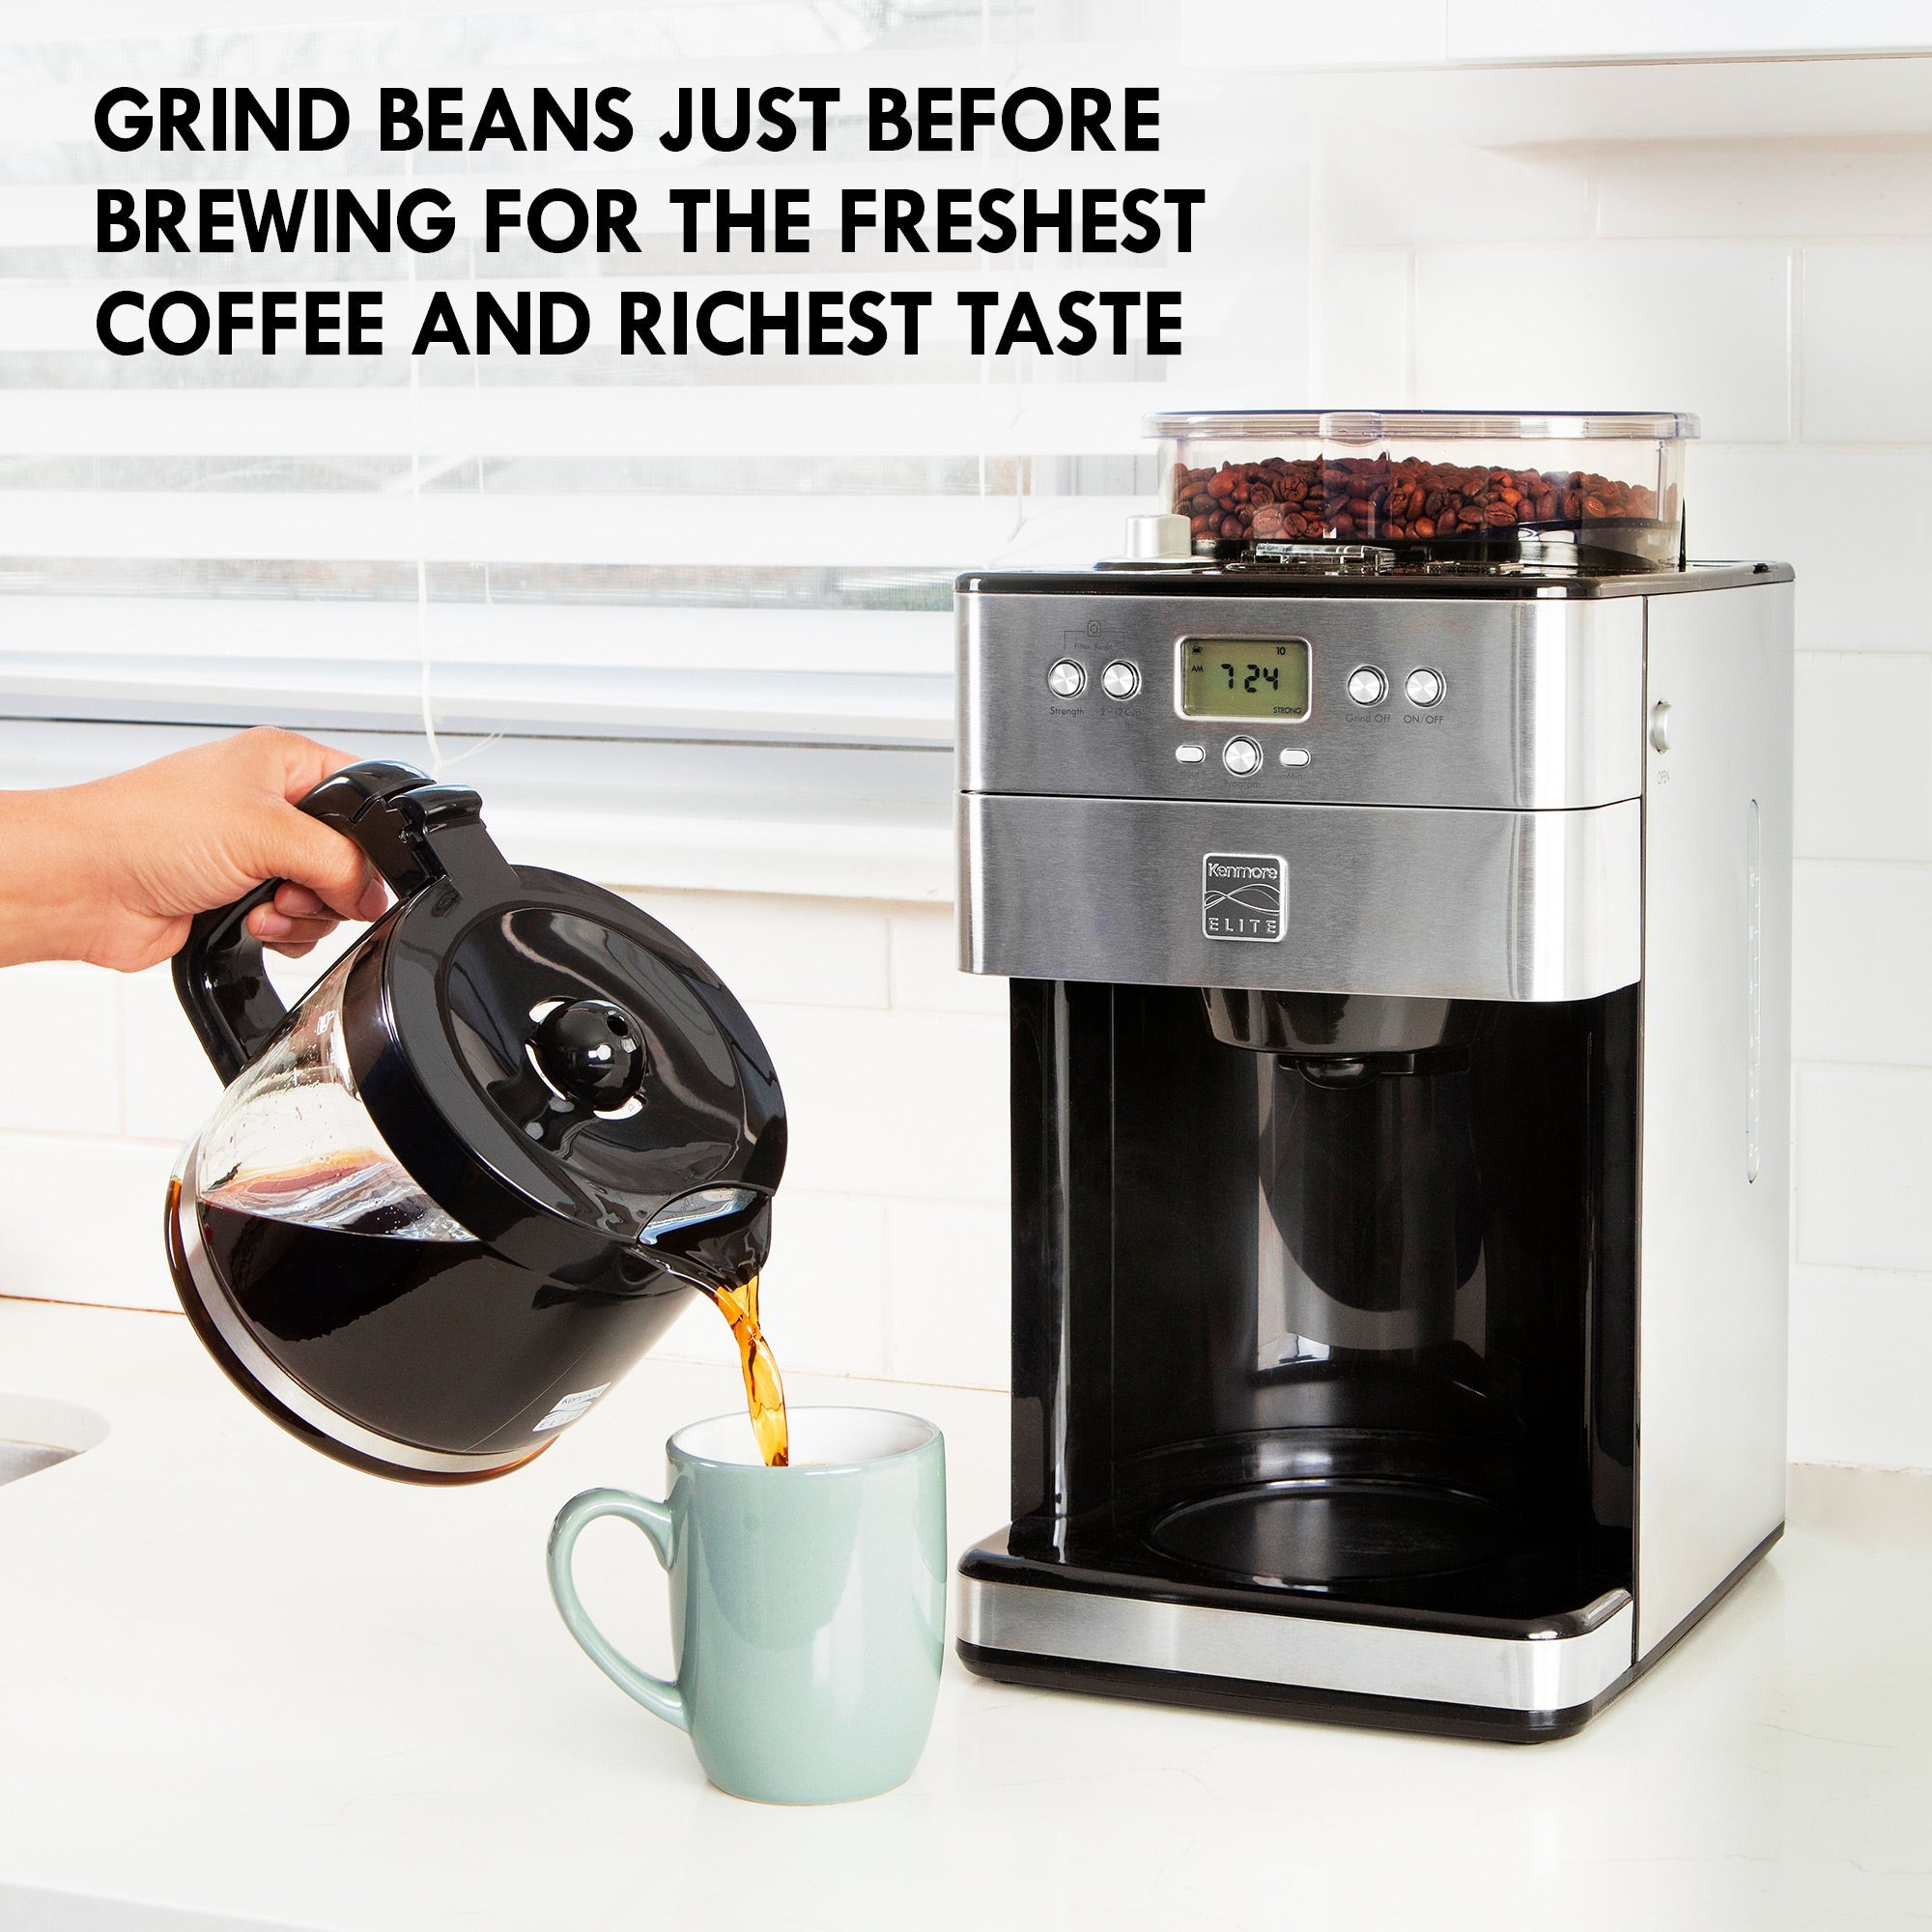 Lifestyle image of Kenmore grind and brew coffee maker on a white counter with white tile backsplash and a window with white blinds behind it and a person's hand pouring coffee from the glass carafe into a light blue mug in front. Text above reads, "Grind beans just before brewing for the freshest coffee and richest taste"